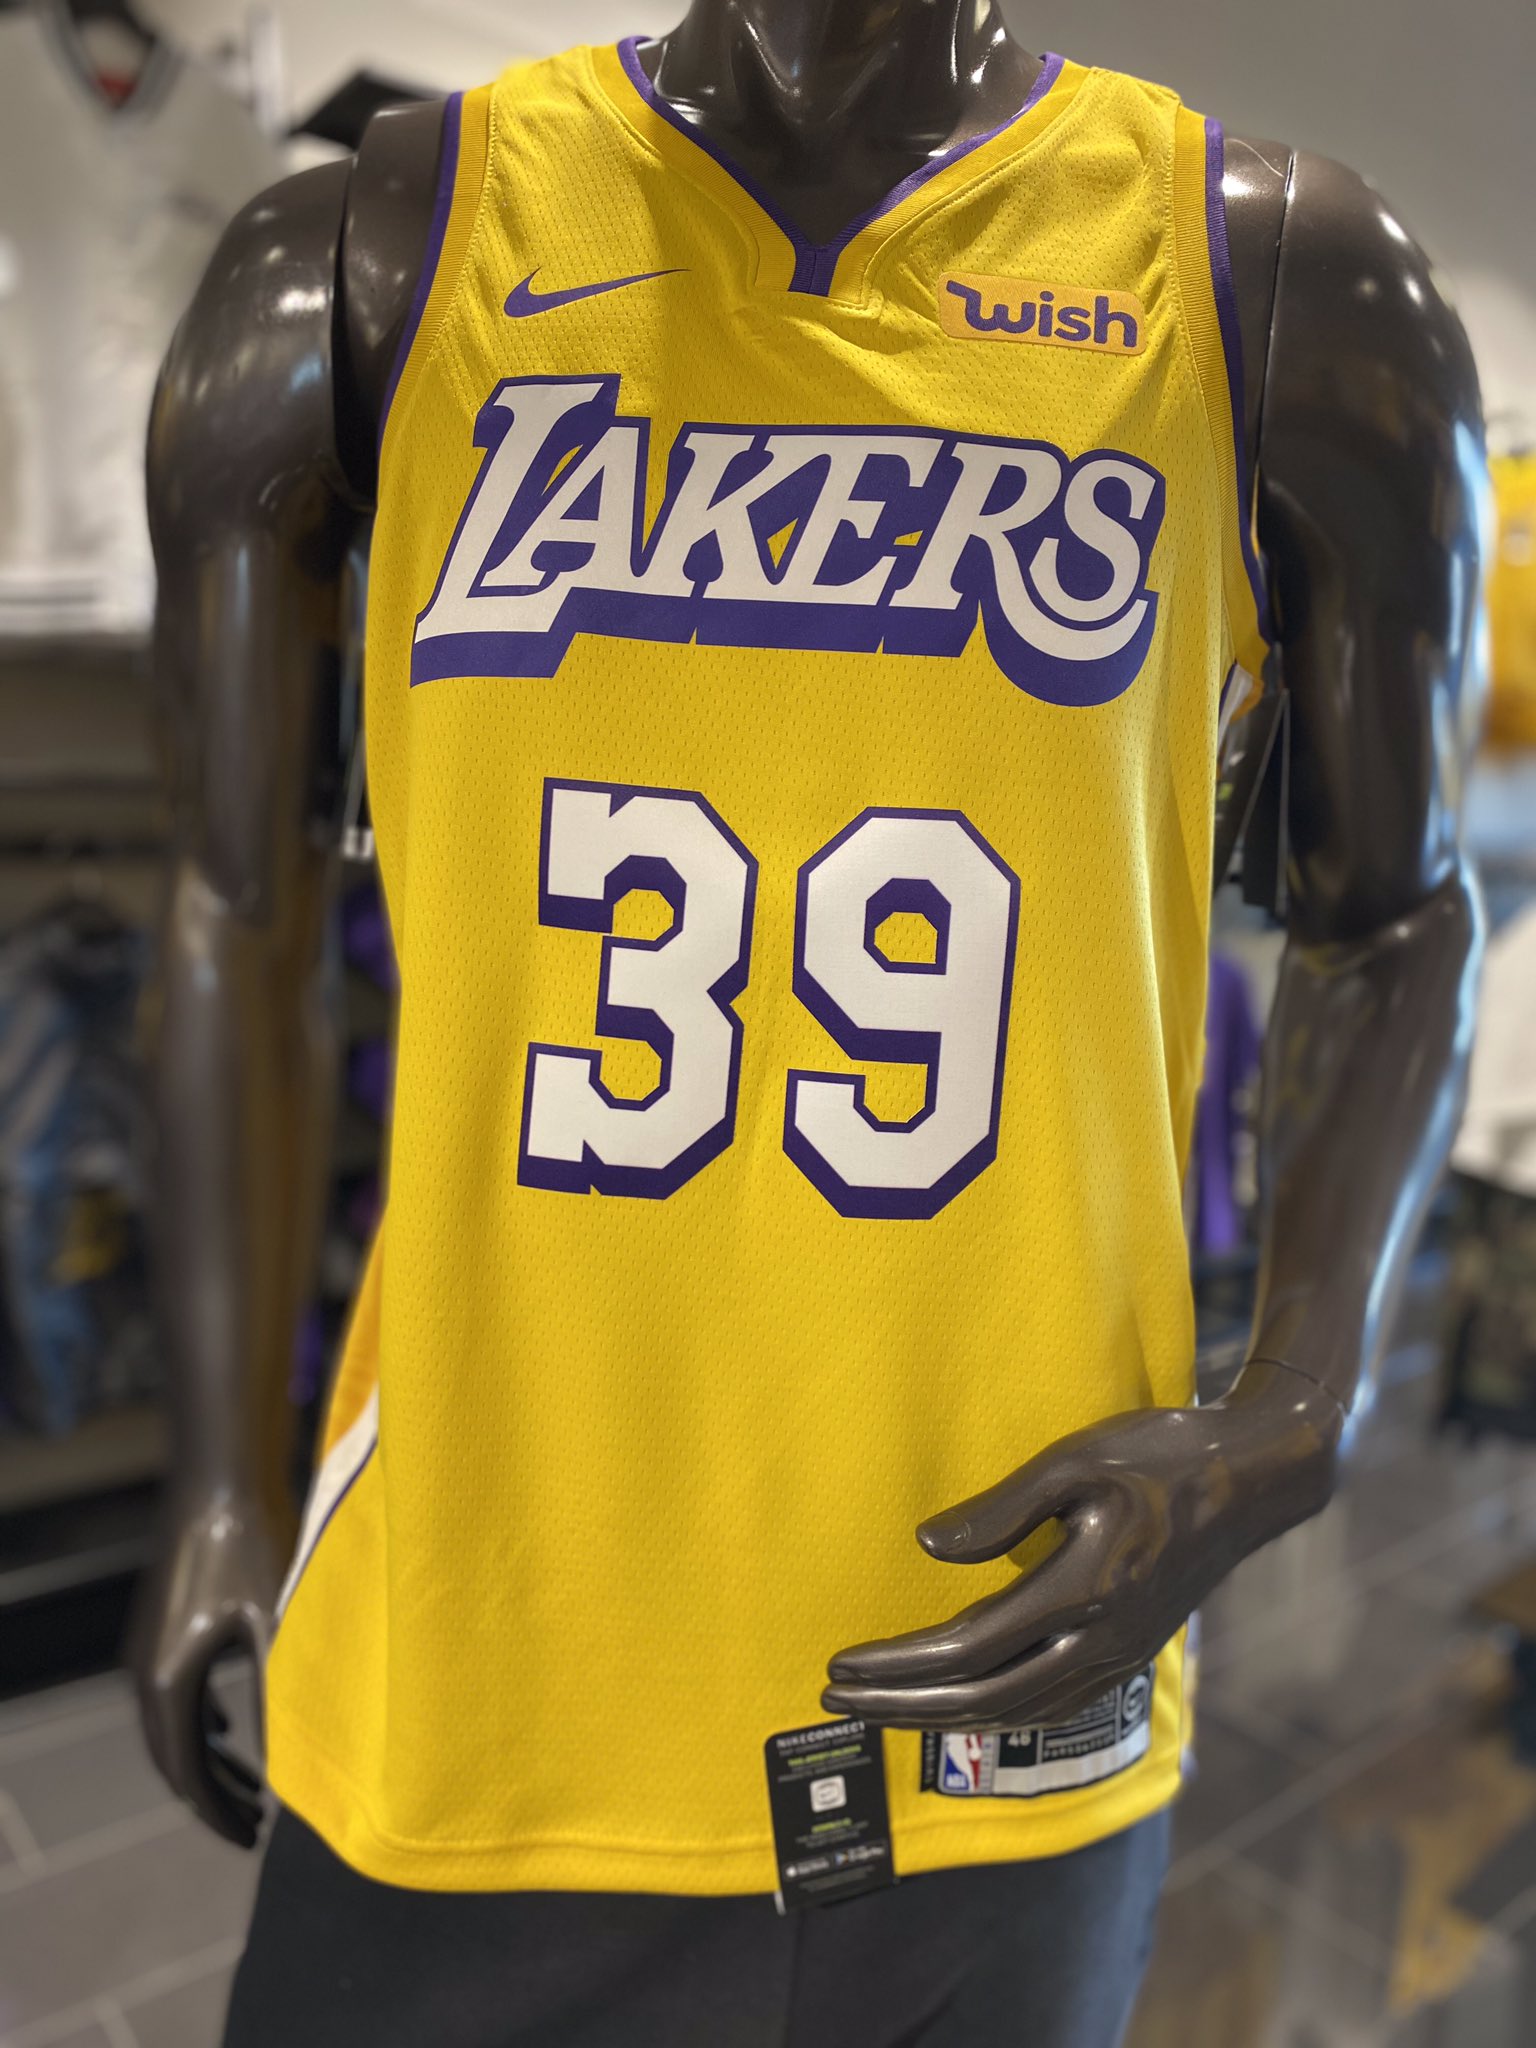 Lakers Team Shop on X: New city edition jerseys! 💜💛⭐️ https